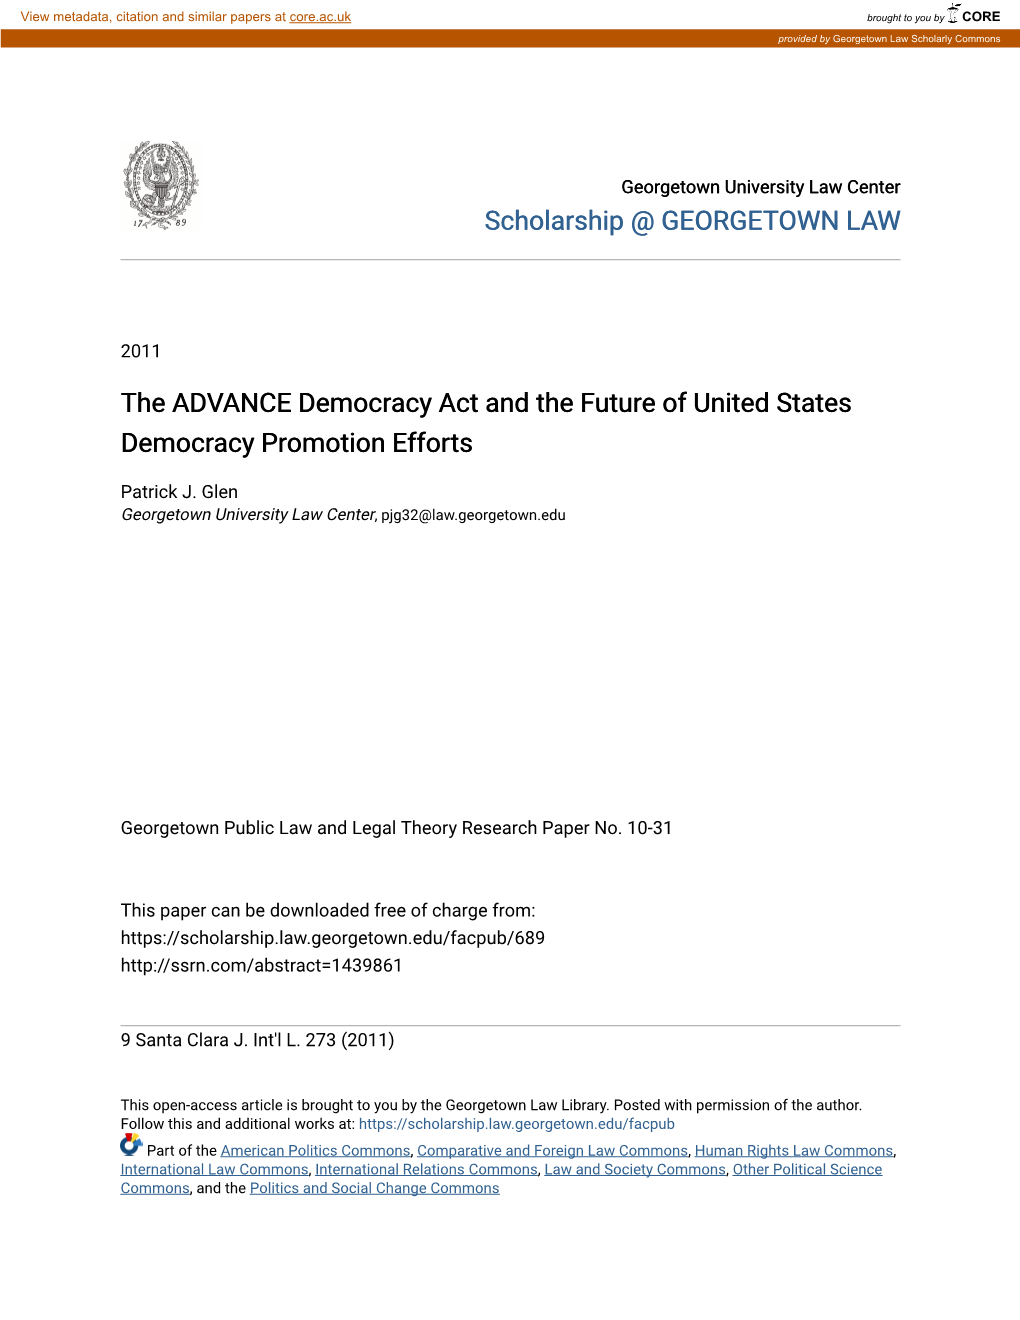 The ADVANCE Democracy Act and the Future of United States Democracy Promotion Efforts